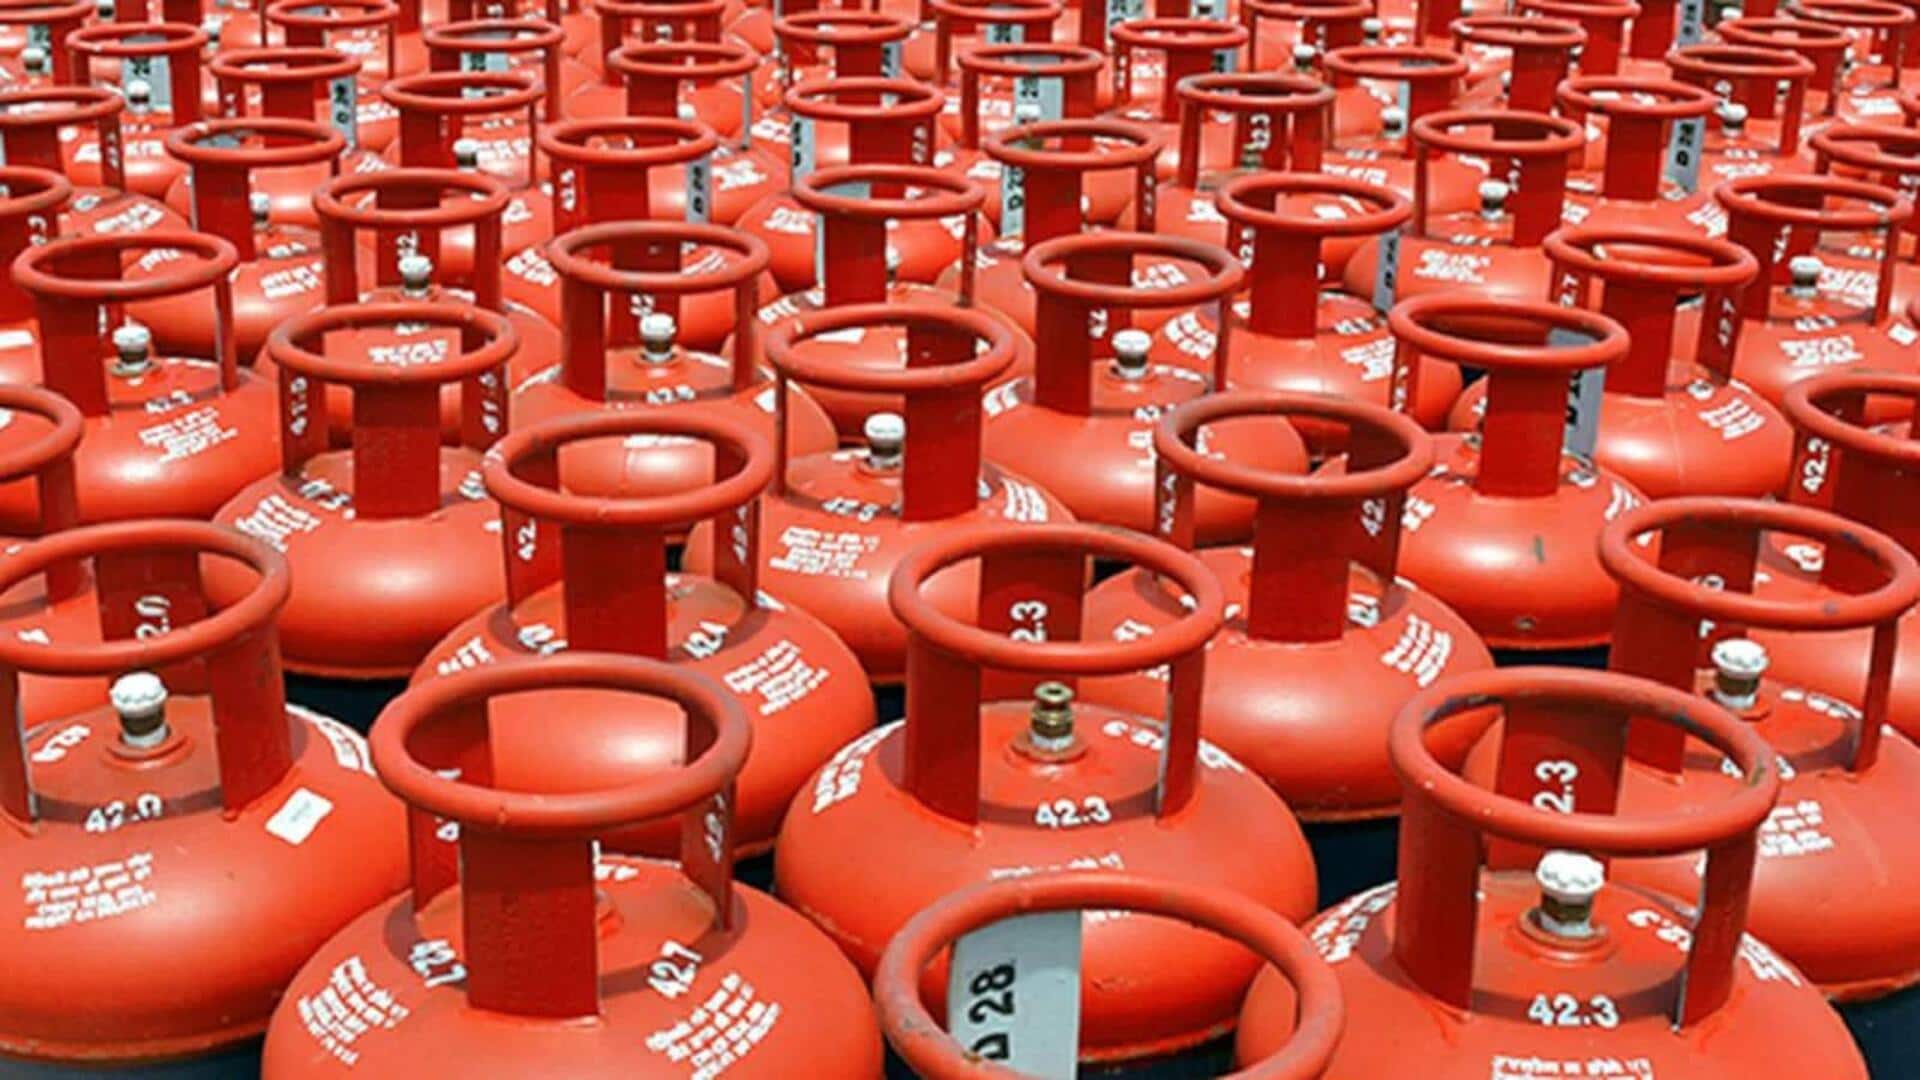 Commercial LPG cylinder costs hiked by Rs. 14: Check rates